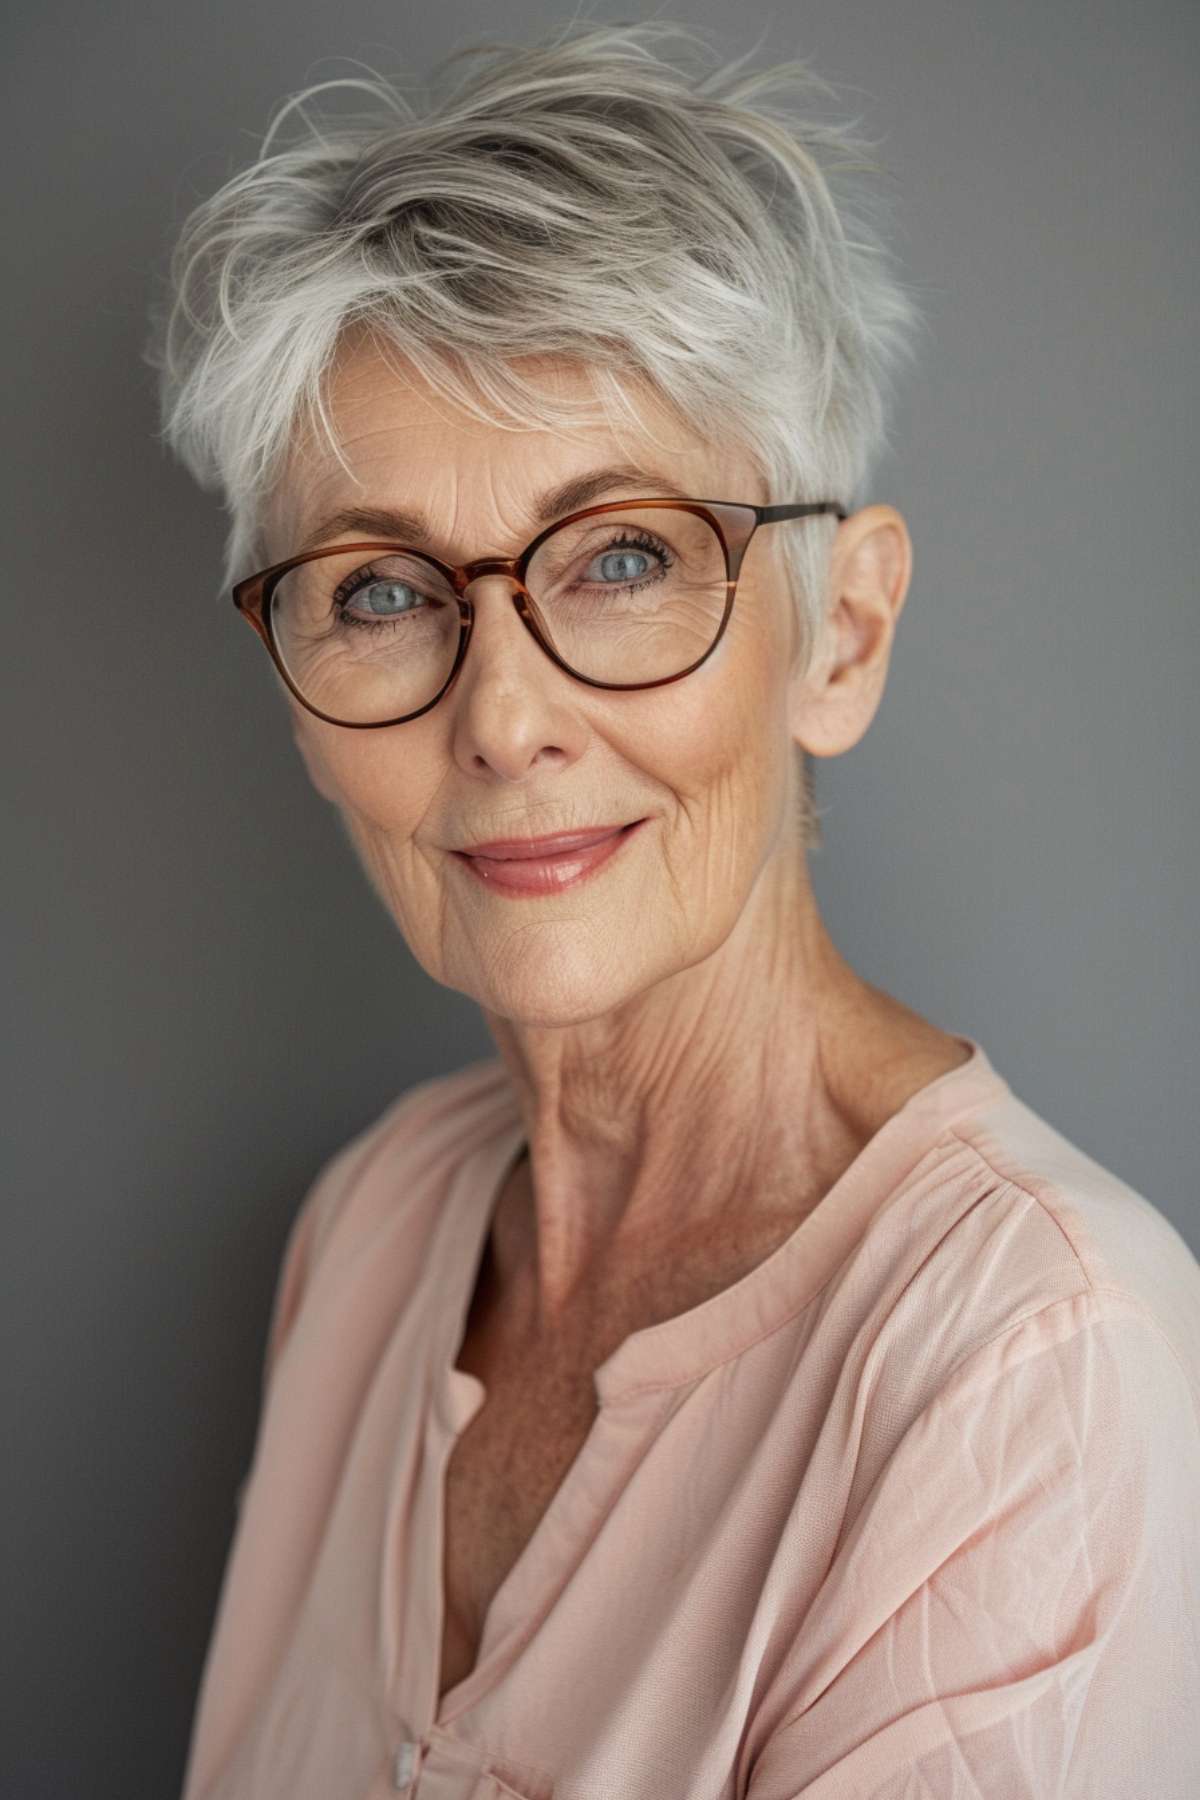 Featuring textured layers and grey tones, this choppy pixie cut is perfect for older women with glasses.